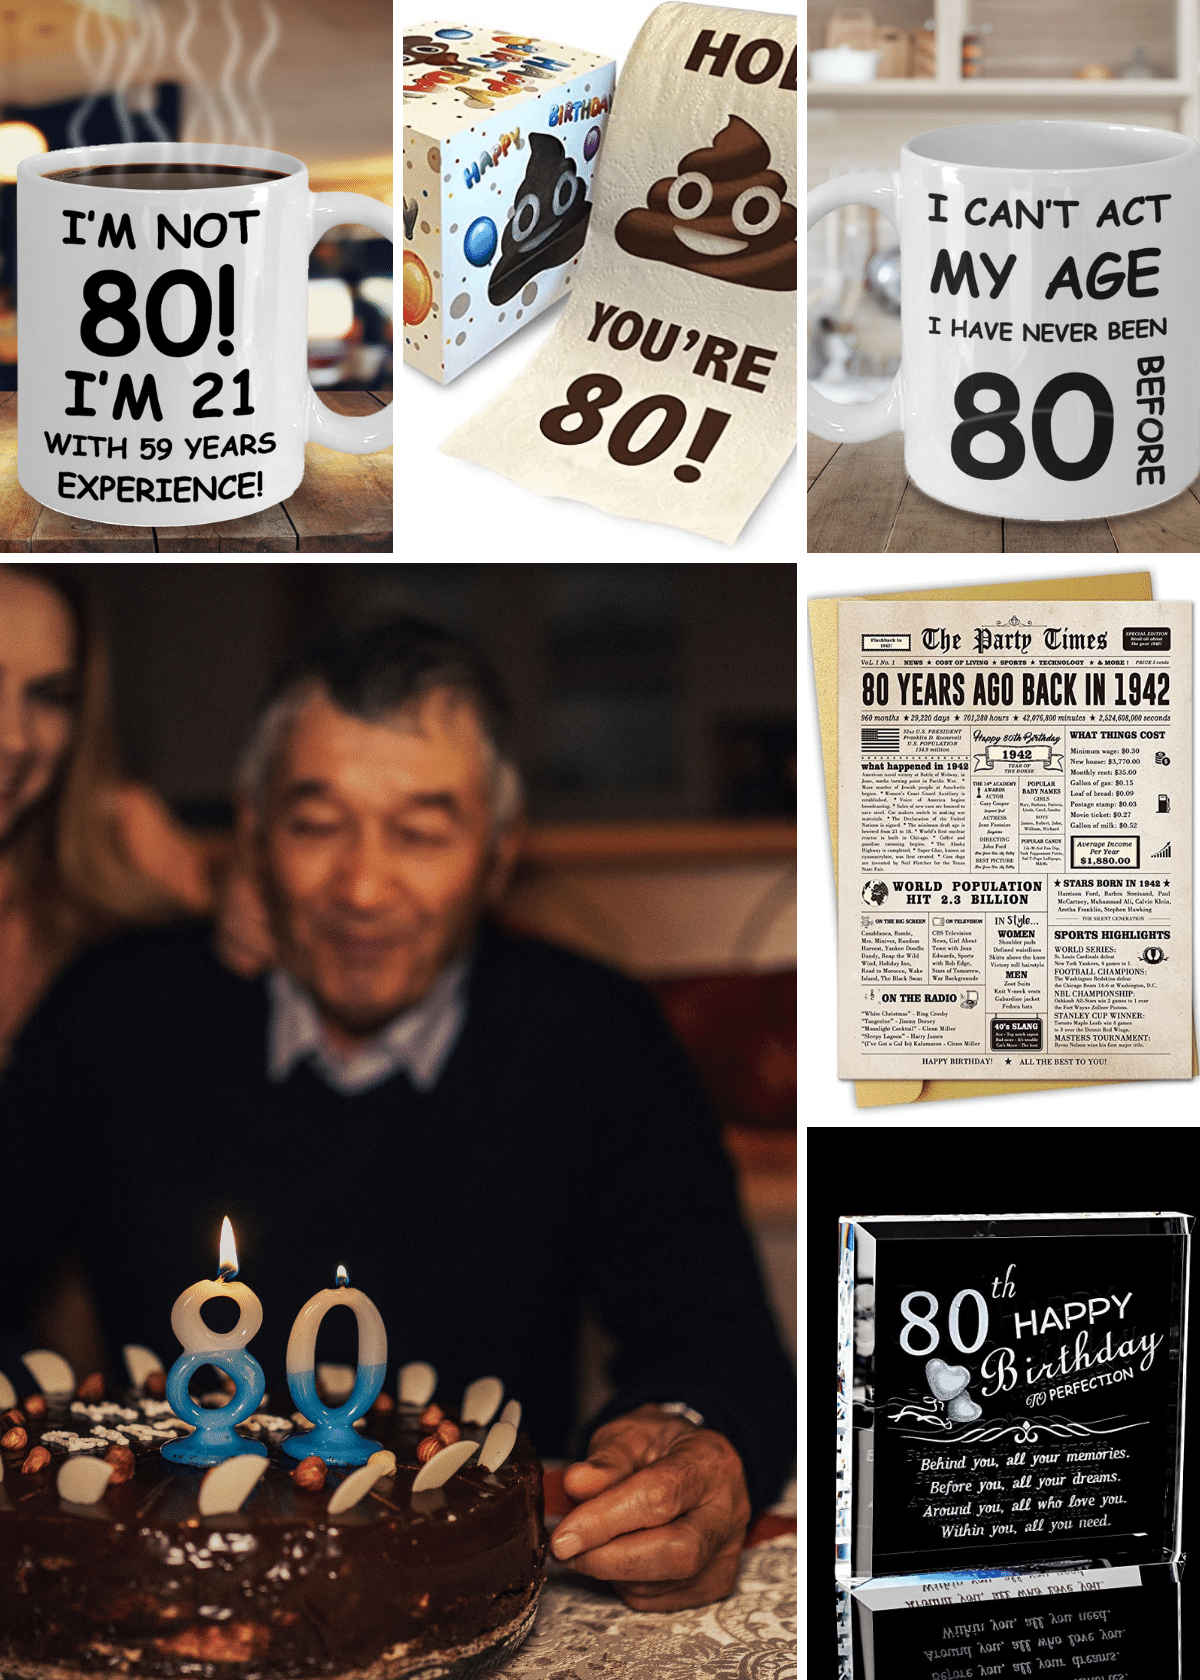 The Best Birthday Gifts for 80 Year Old Men